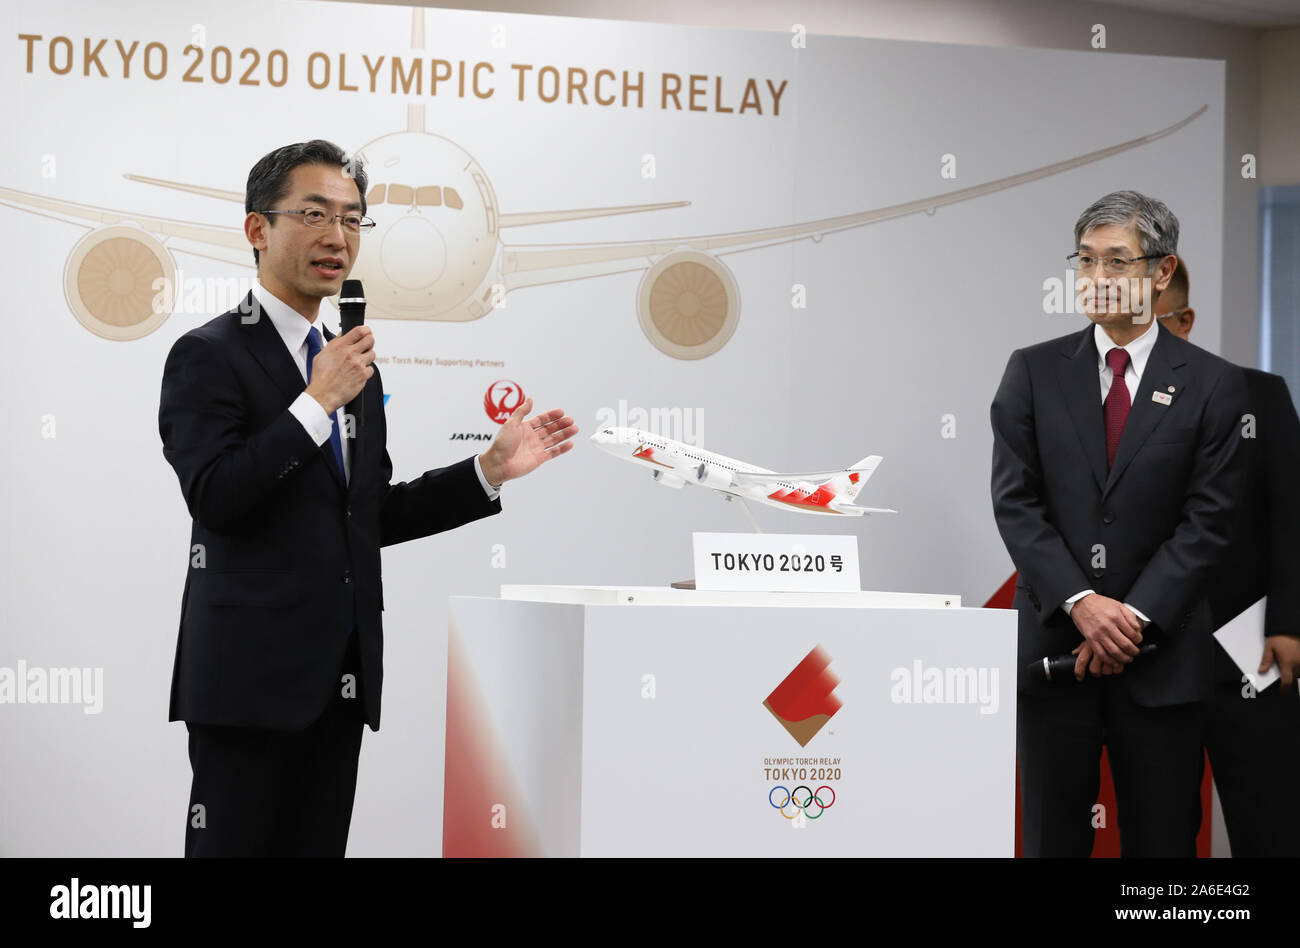 Tokyo, Japan. 25th Oct, 2019. All Nippon Airways (ANA) president Yuji Hirako (L) and Japan Airlines (JAL) president Yuji Akasaka (R) display the aircraft design to deliver Olympic flame from Greece in Tokyo on Friday, October 25, 2019. Judo Olympic gold medalist Tadahiro Nomura and women's wrestling Olympic goldmedalist saori Yoshida will carry Olympic flame back to Japan next March for Tokyo 2020 Olympics torch relay. Credit: Yoshio Tsunoda/AFLO/Alamy Live News Stock Photo